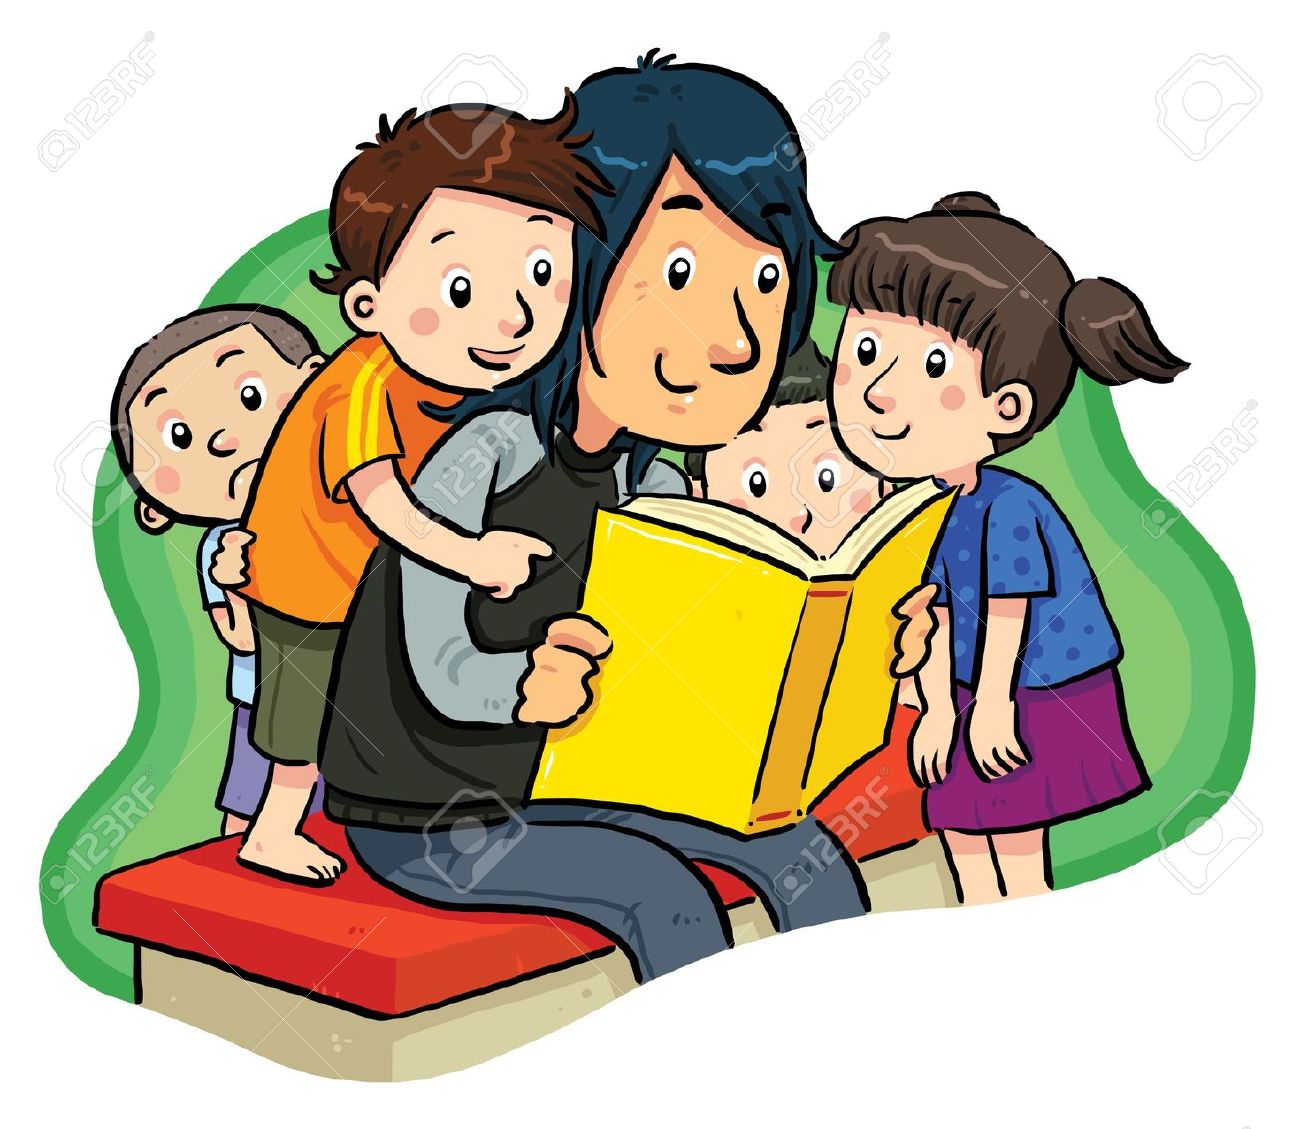 Storytelling Clipart. coloure